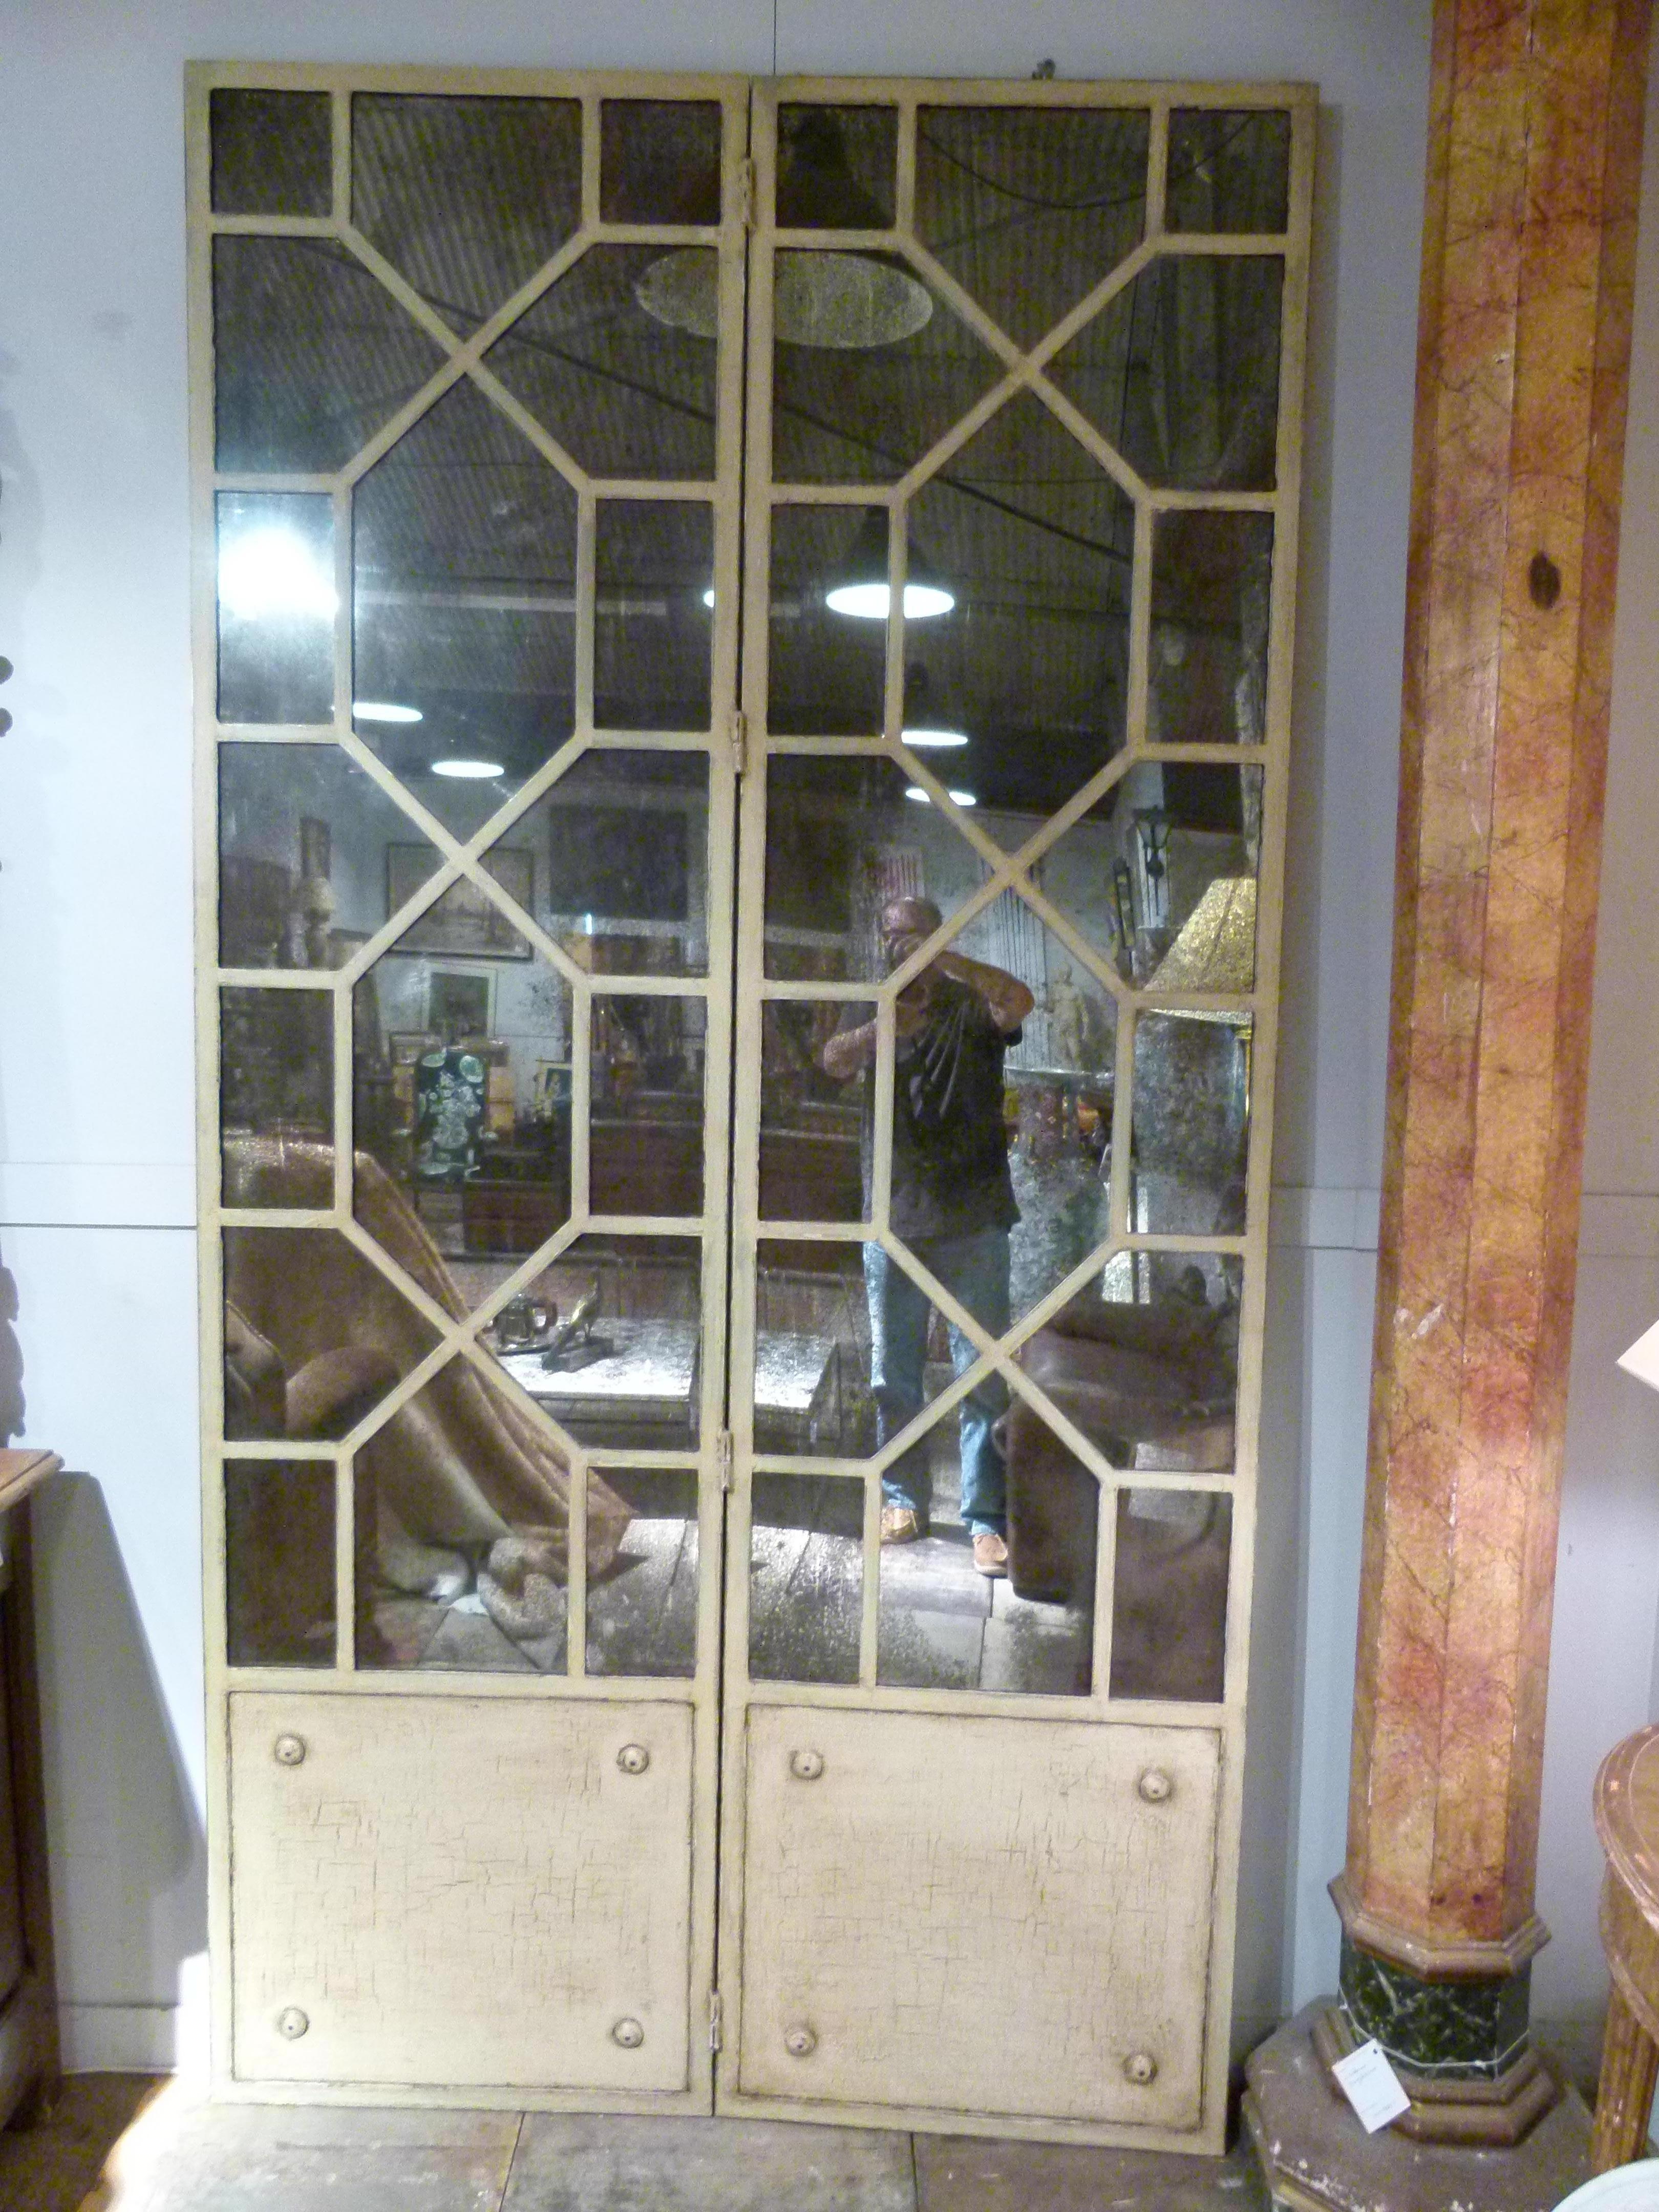 20th century french white painted iron double door with mirrors. The door is formed by 4 elements: 2 x 2 double doors (fourfold).
Each set of doors measure 130cm ( 51 in), so double door 260 cm (102 in)

A unique decorative interior door that